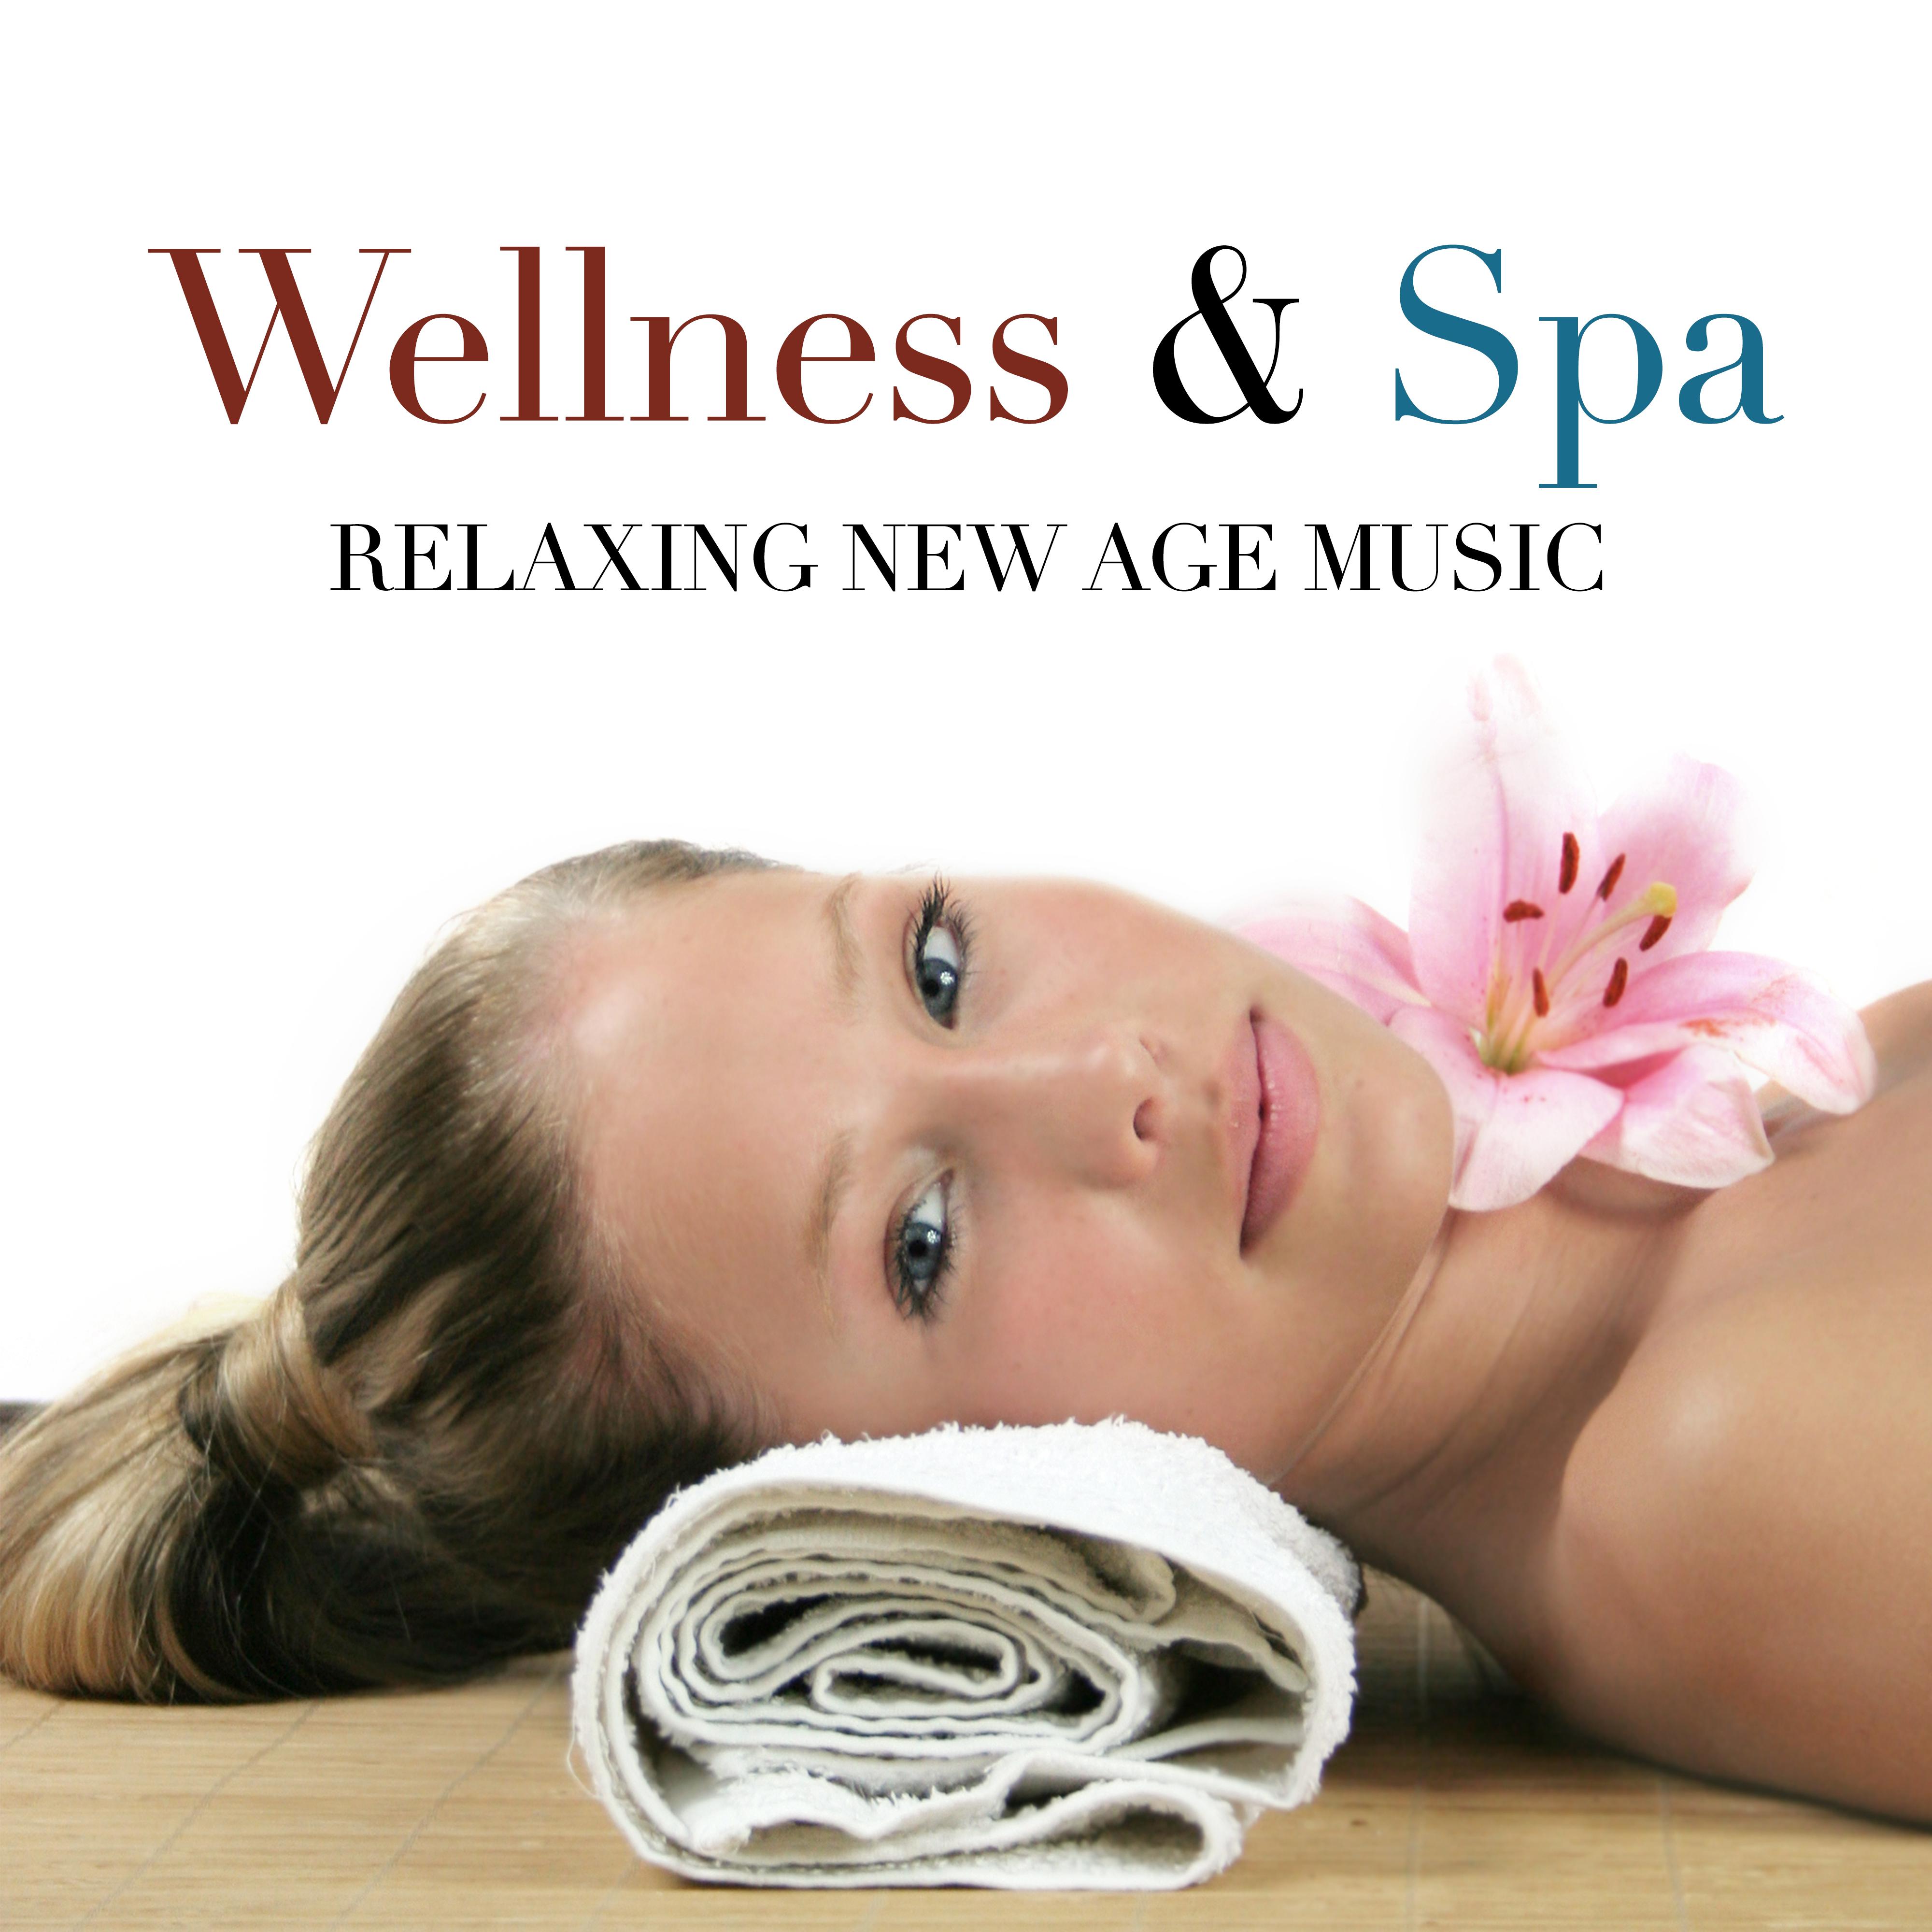 Wellness & Spa: Relaxing New Age Music with Piano Melodies and Nature Sounds